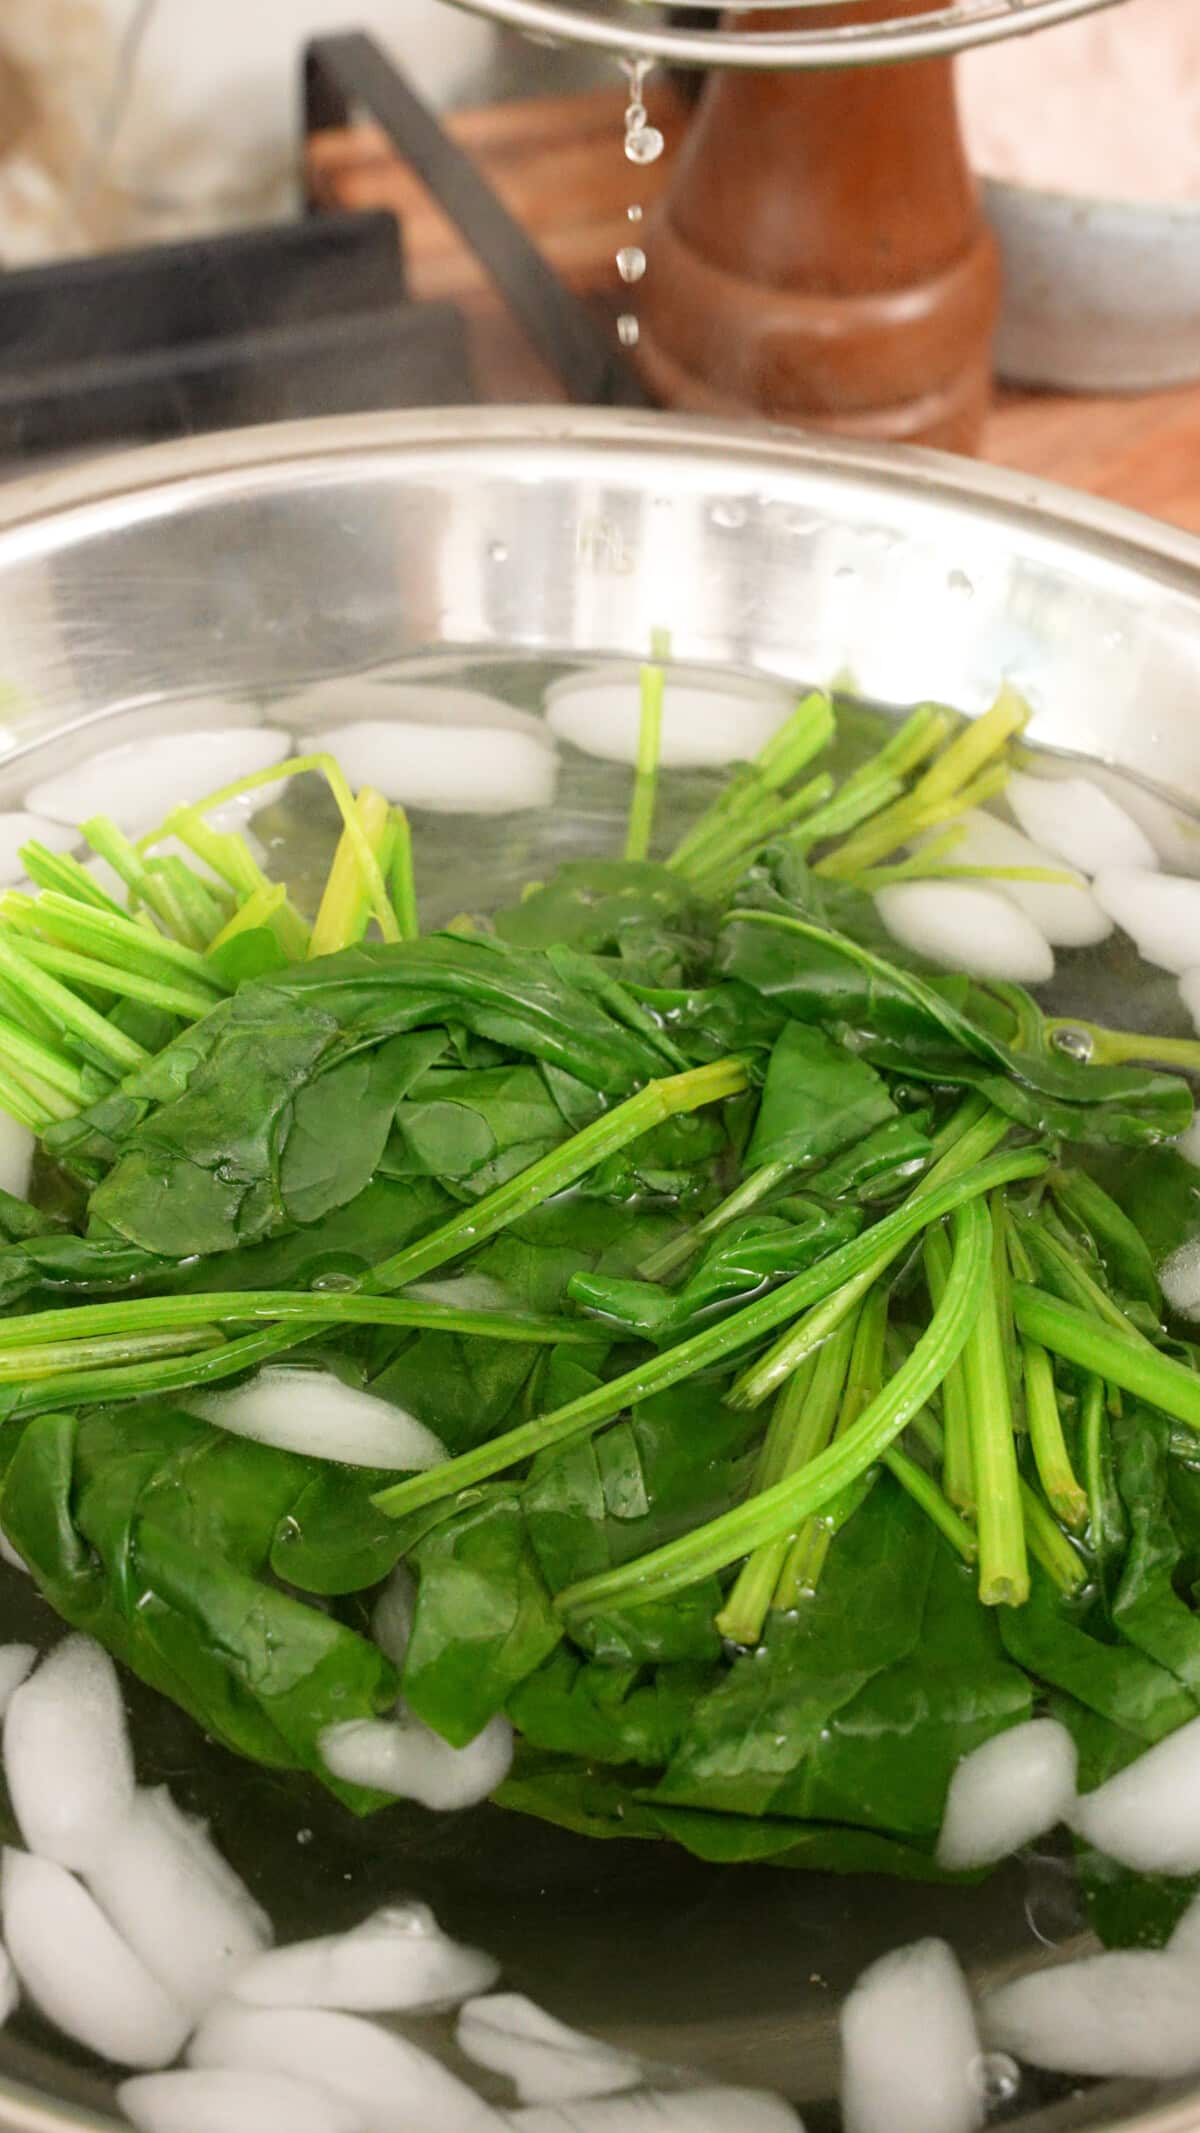 Spinach cooling down in an ice bath.